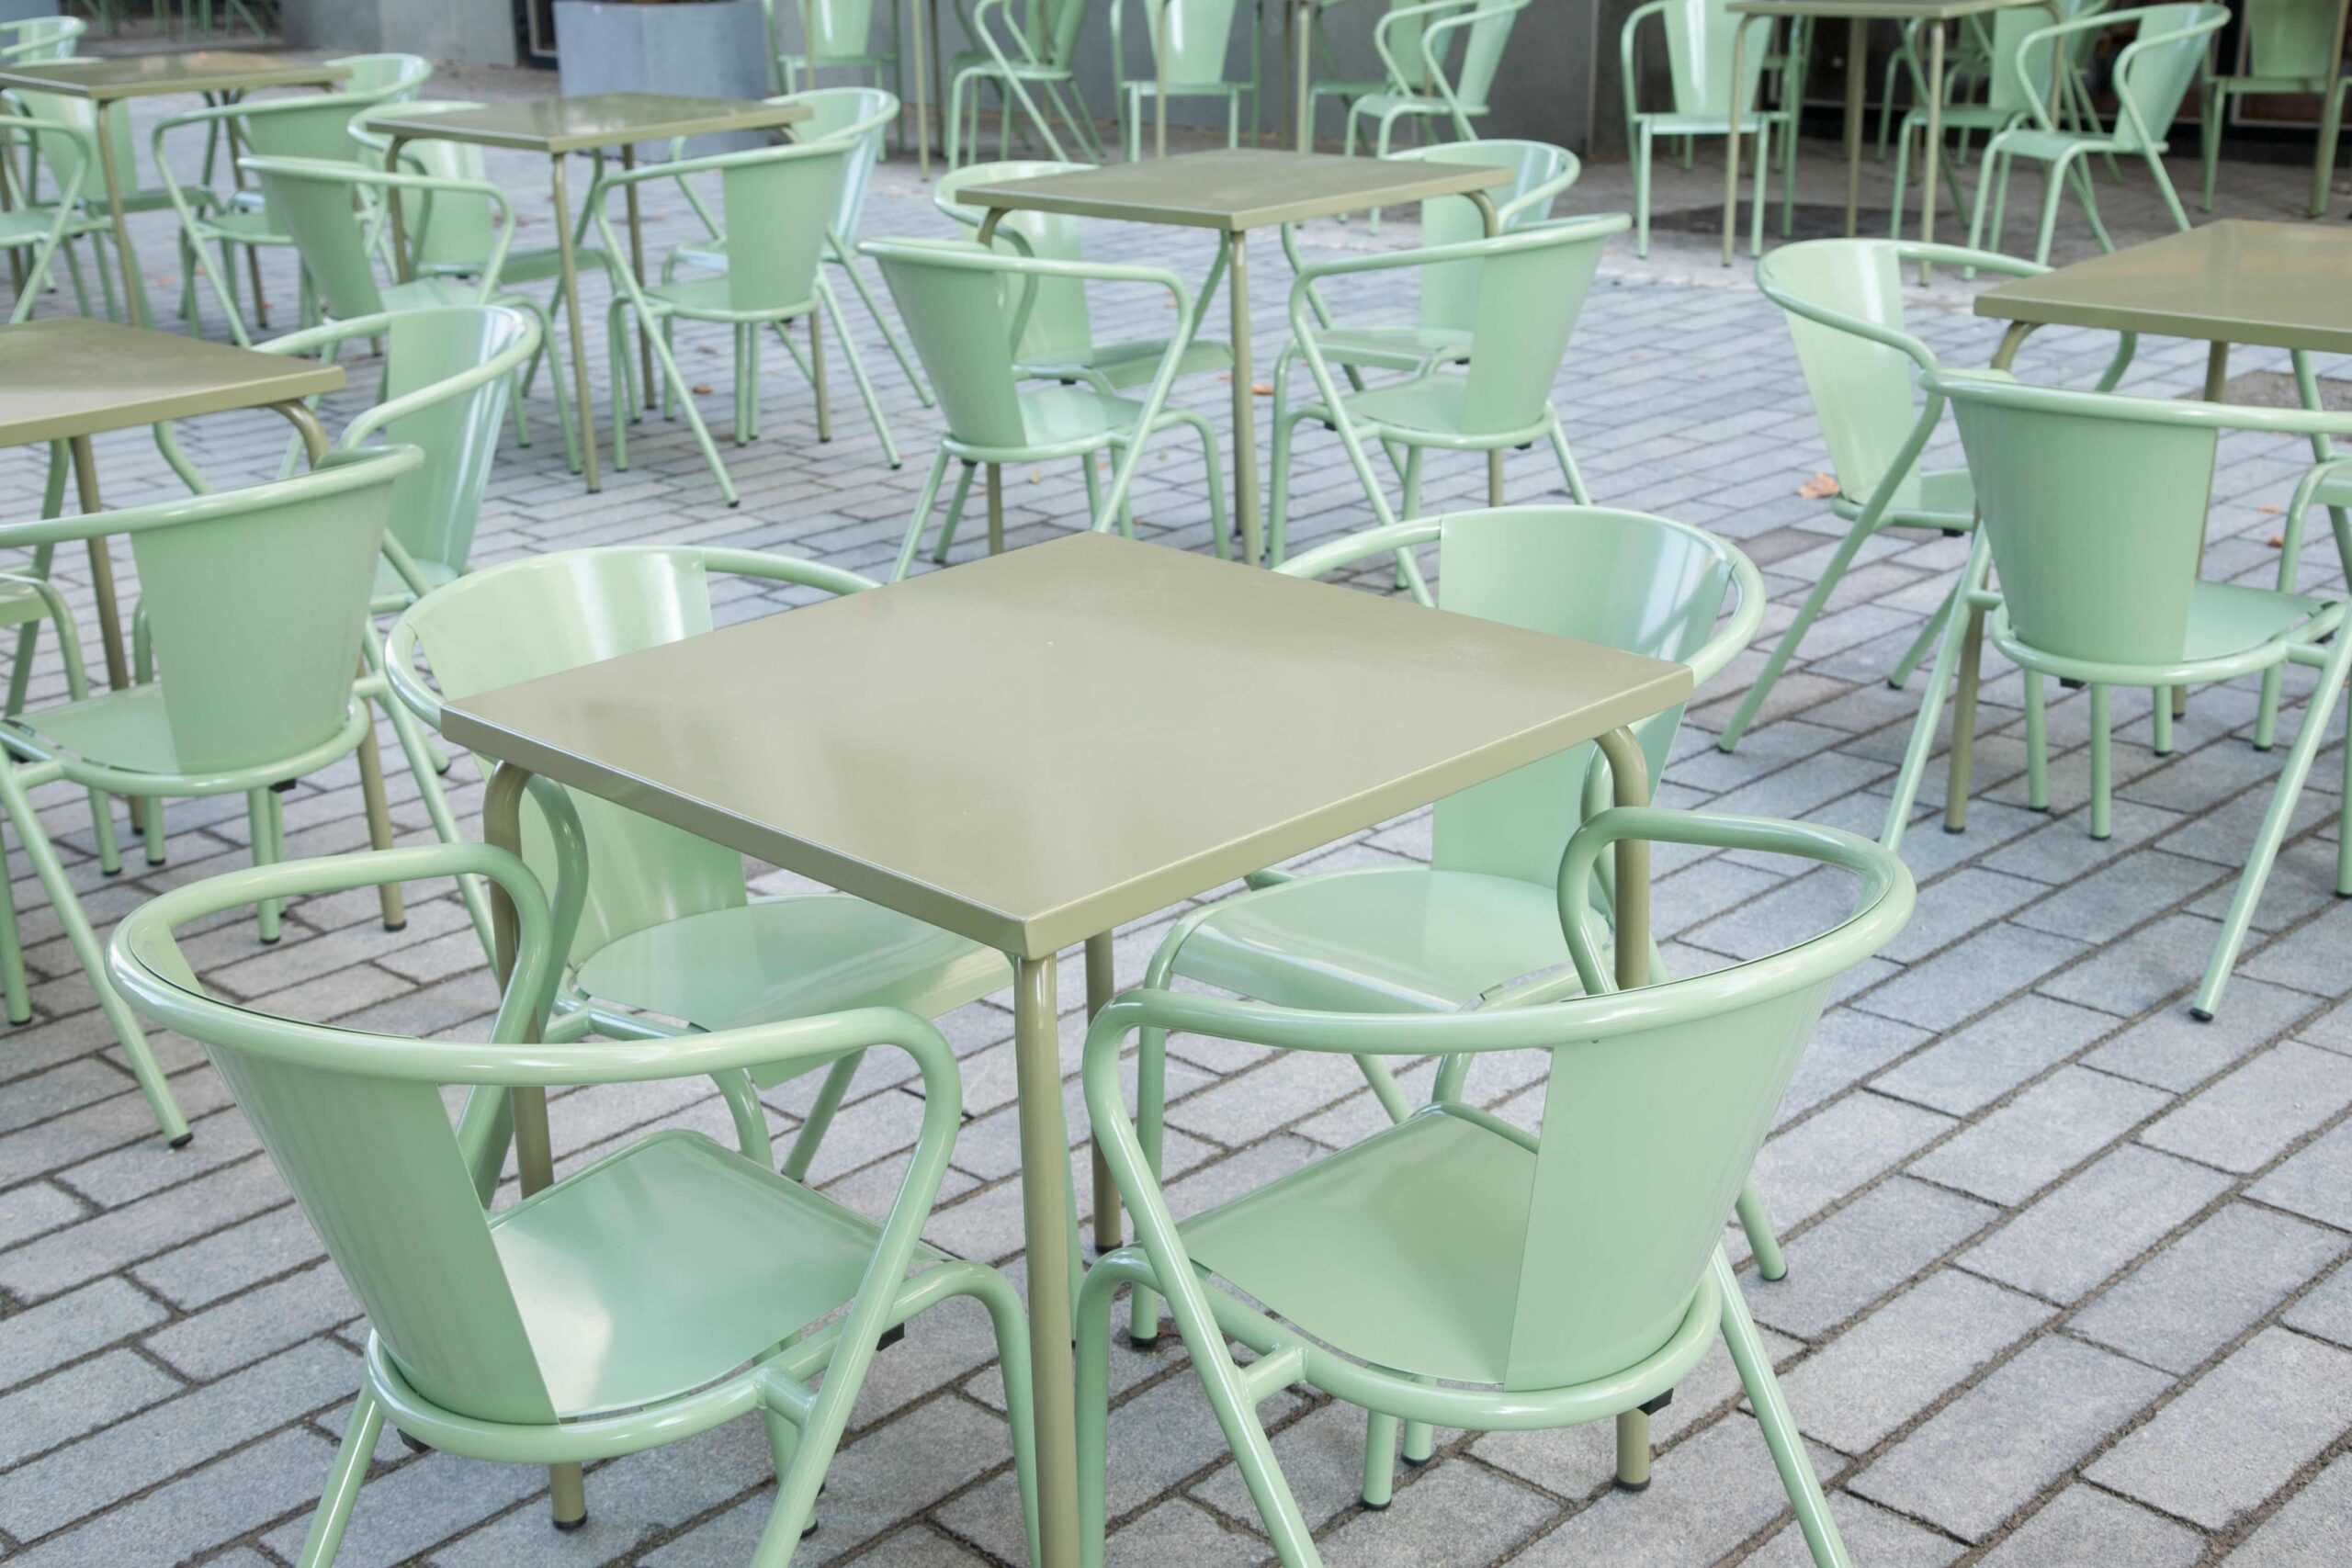 Green cafe chairs